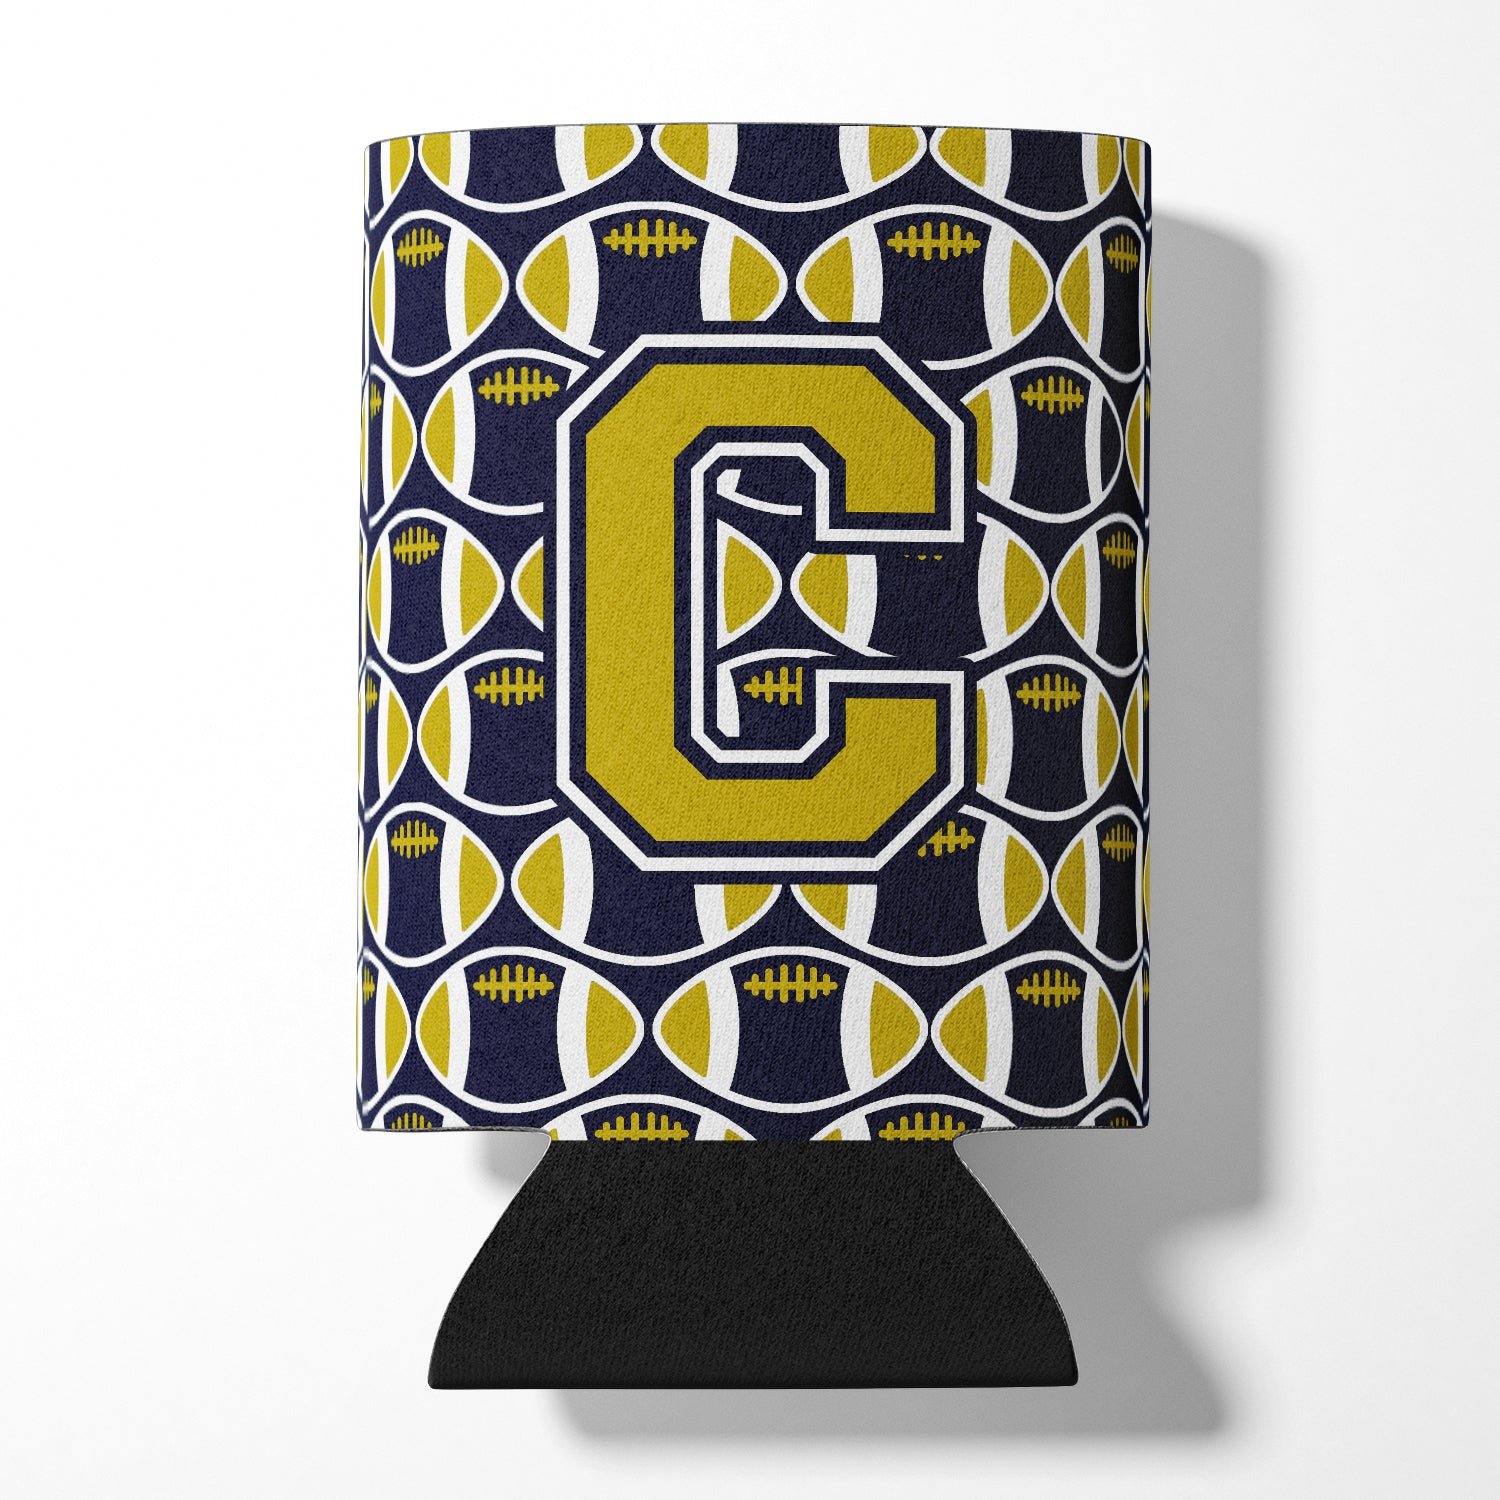 Letter C Football Blue and Gold Can or Bottle Hugger CJ1074-CCC.